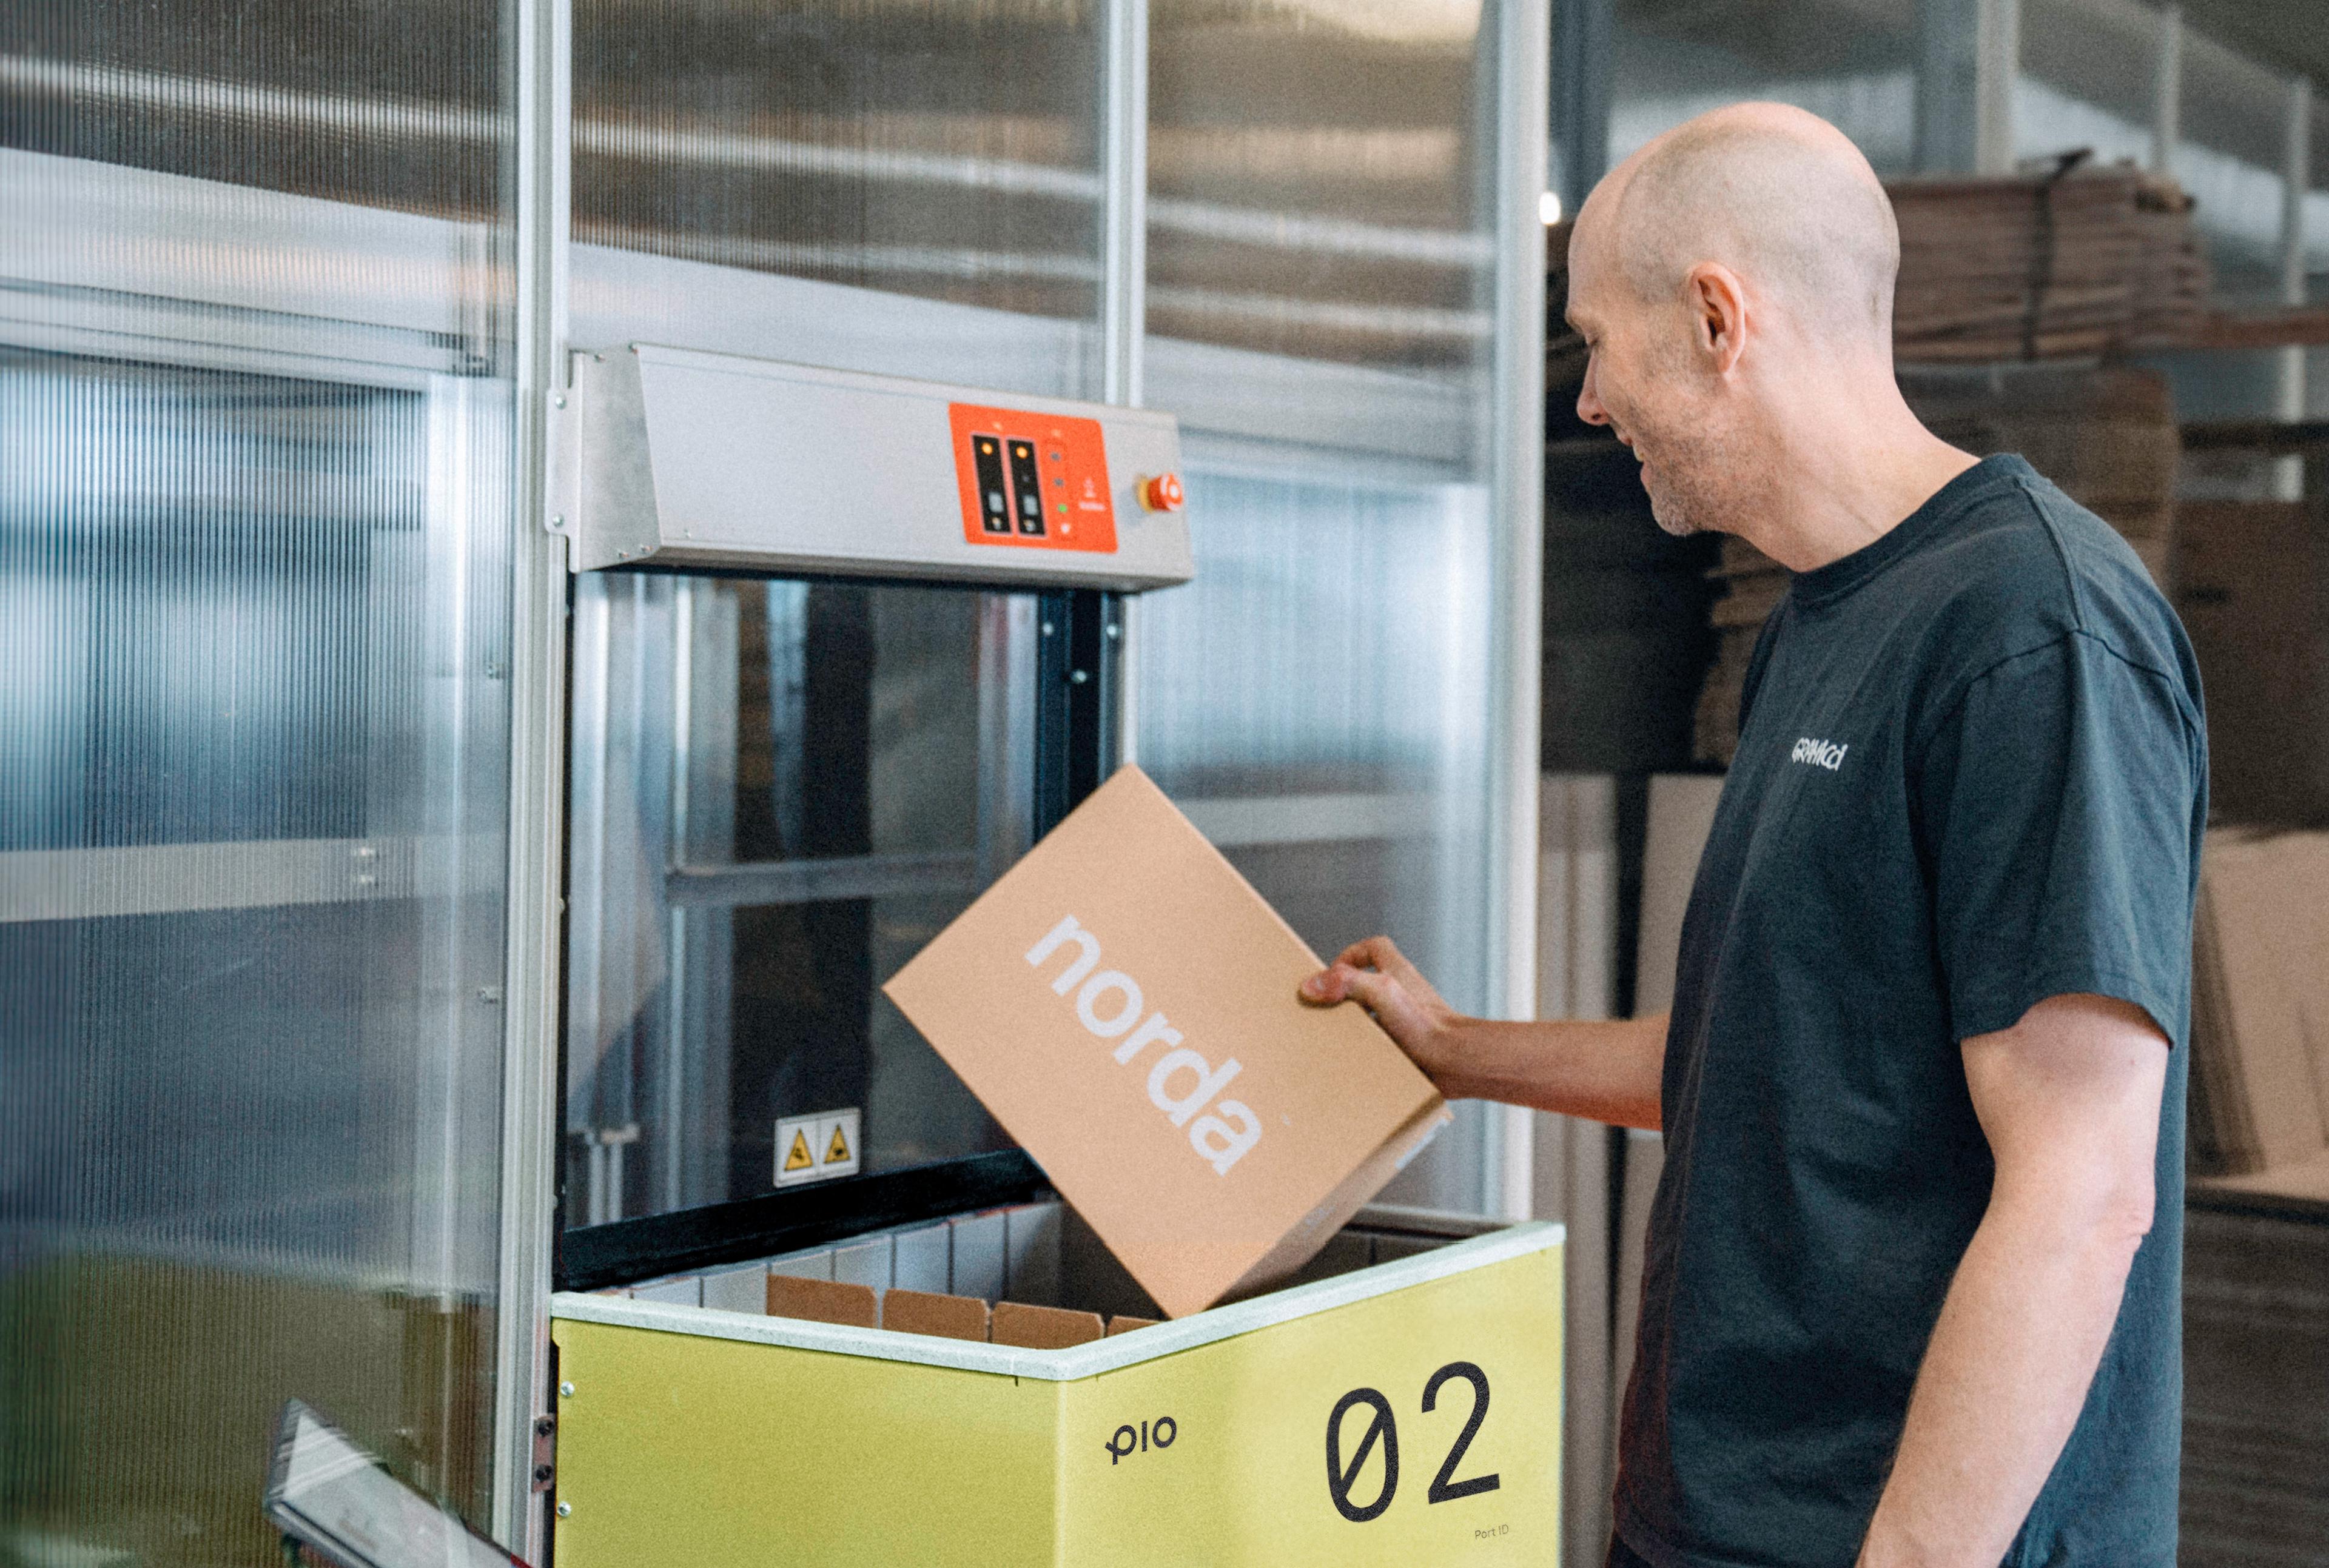 Not only does the transition to Pio’s cube storage allow you to maximize the warehouse space you already have, but it enables vastly more efficient workflows that can improve quality of life for you and your team.